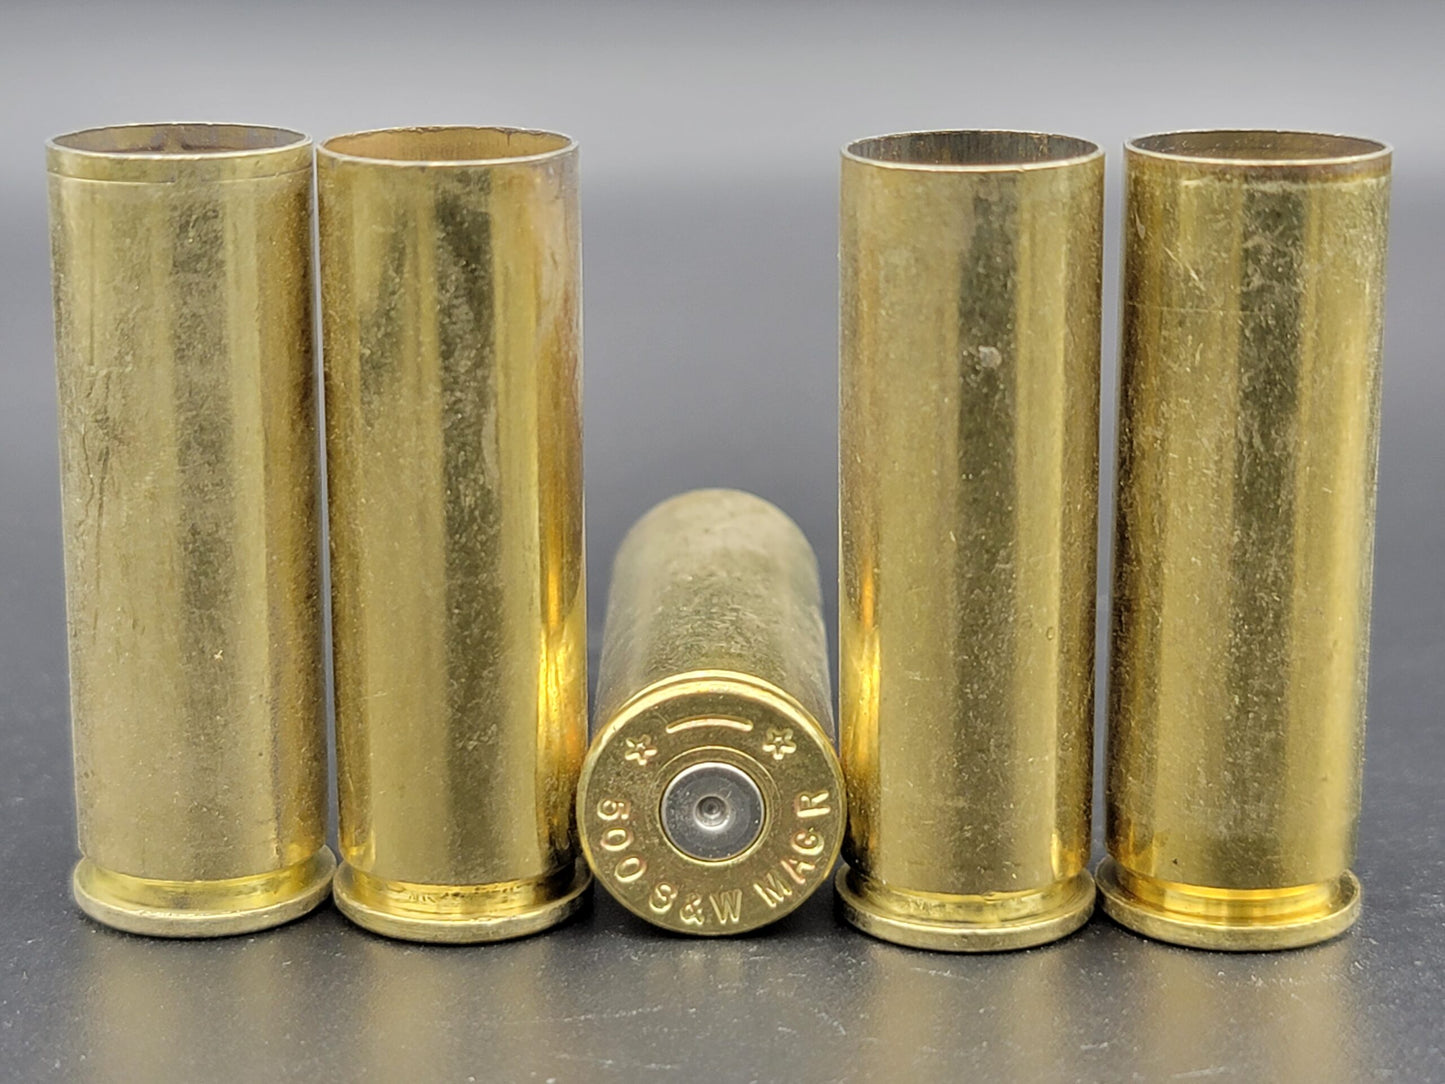 500 S&W once fired pistol brass. Hand sorted from reputable indoor/military ranges for reloading. Reliable spent casings for precision shooting.